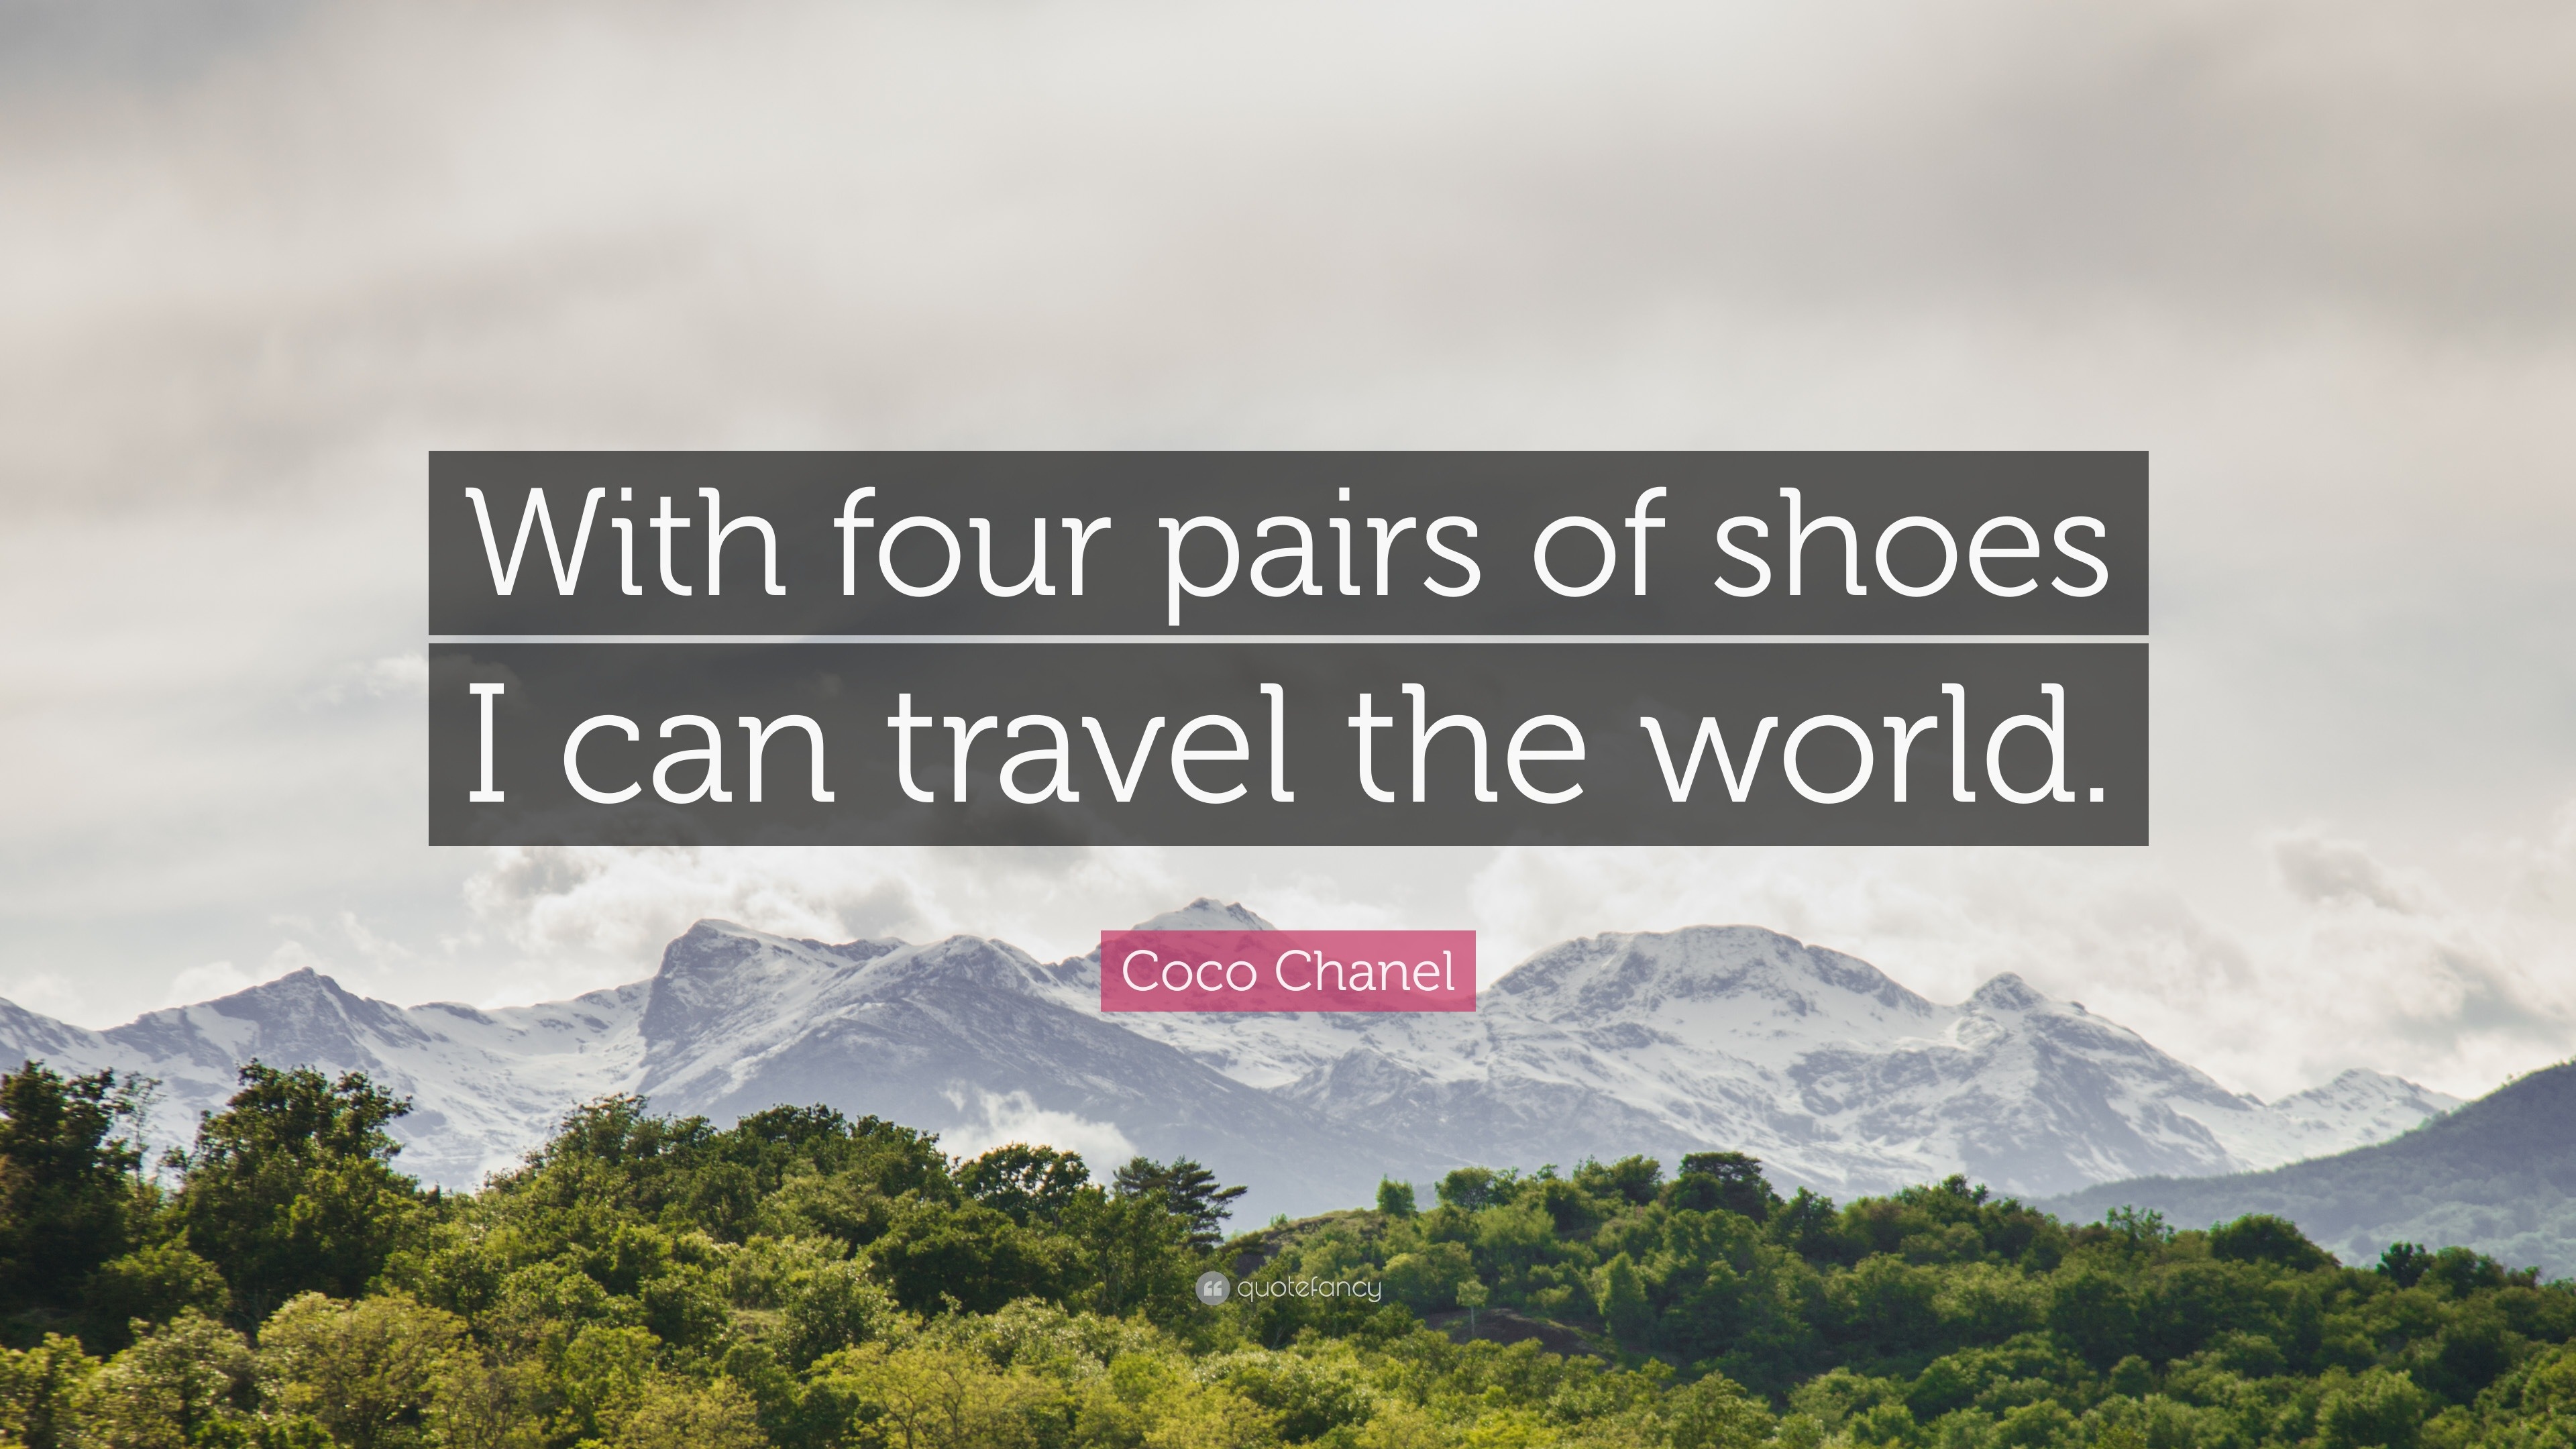 Coco Chanel Quote: “With four pairs of shoes I can travel the world.”